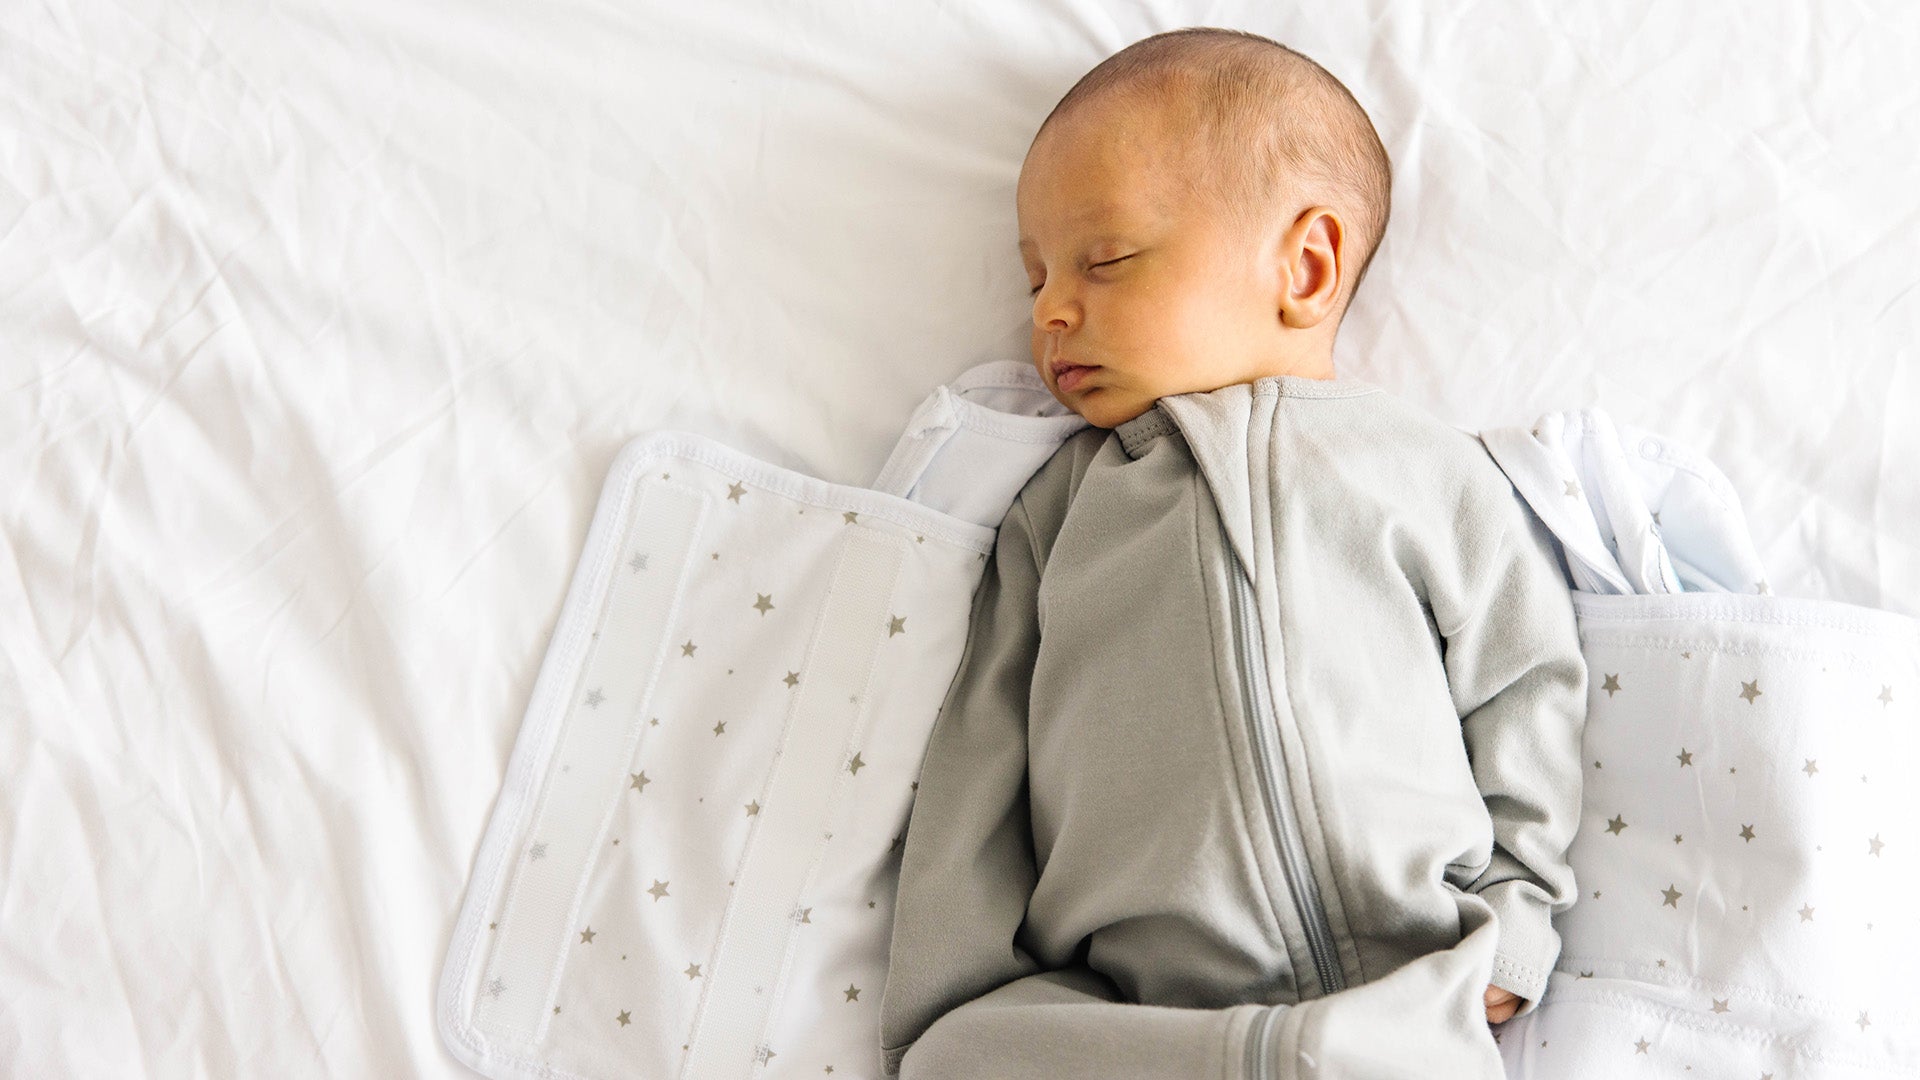 Is Music Good For Babies While Sleeping?